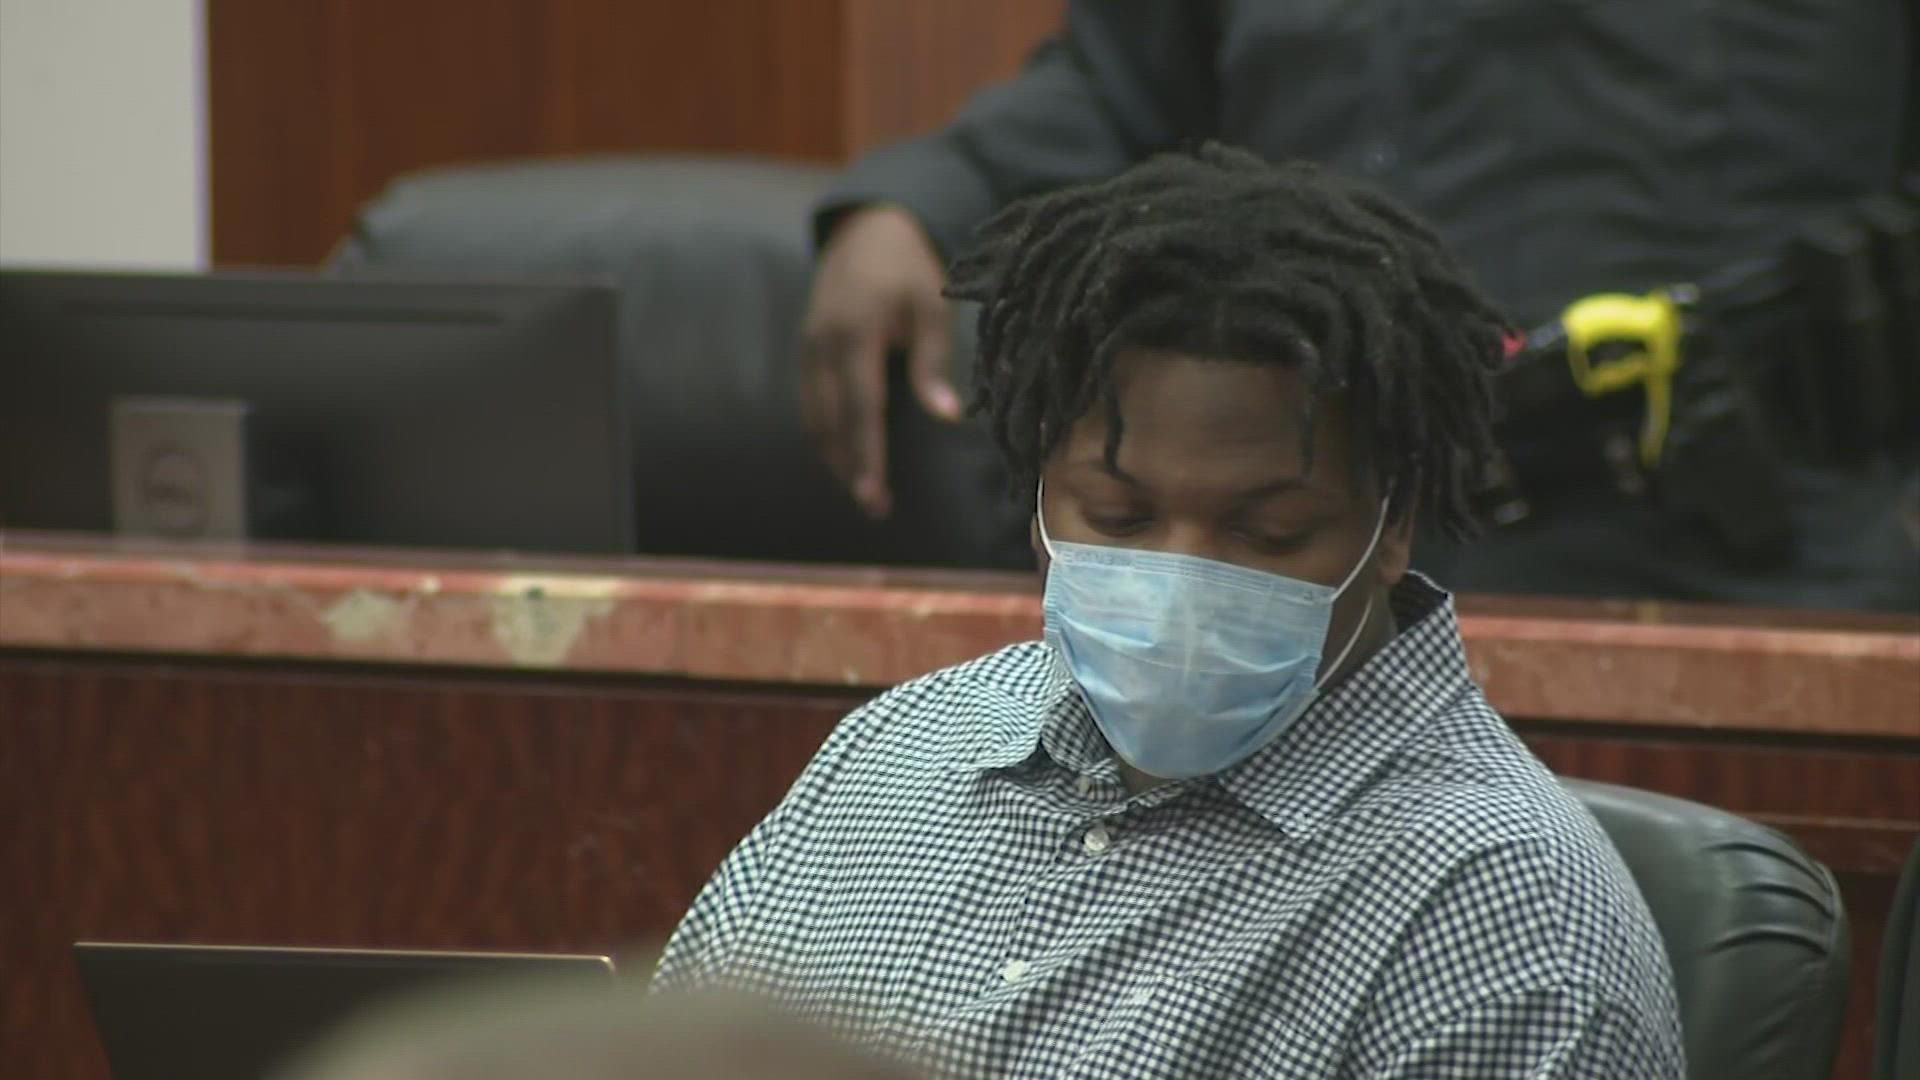 Kendrick Johnson, the man accused of murdering a Lamar High School student in 2018, pleaded not guilty in a courtroom Tuesday morning at the start of his trial.